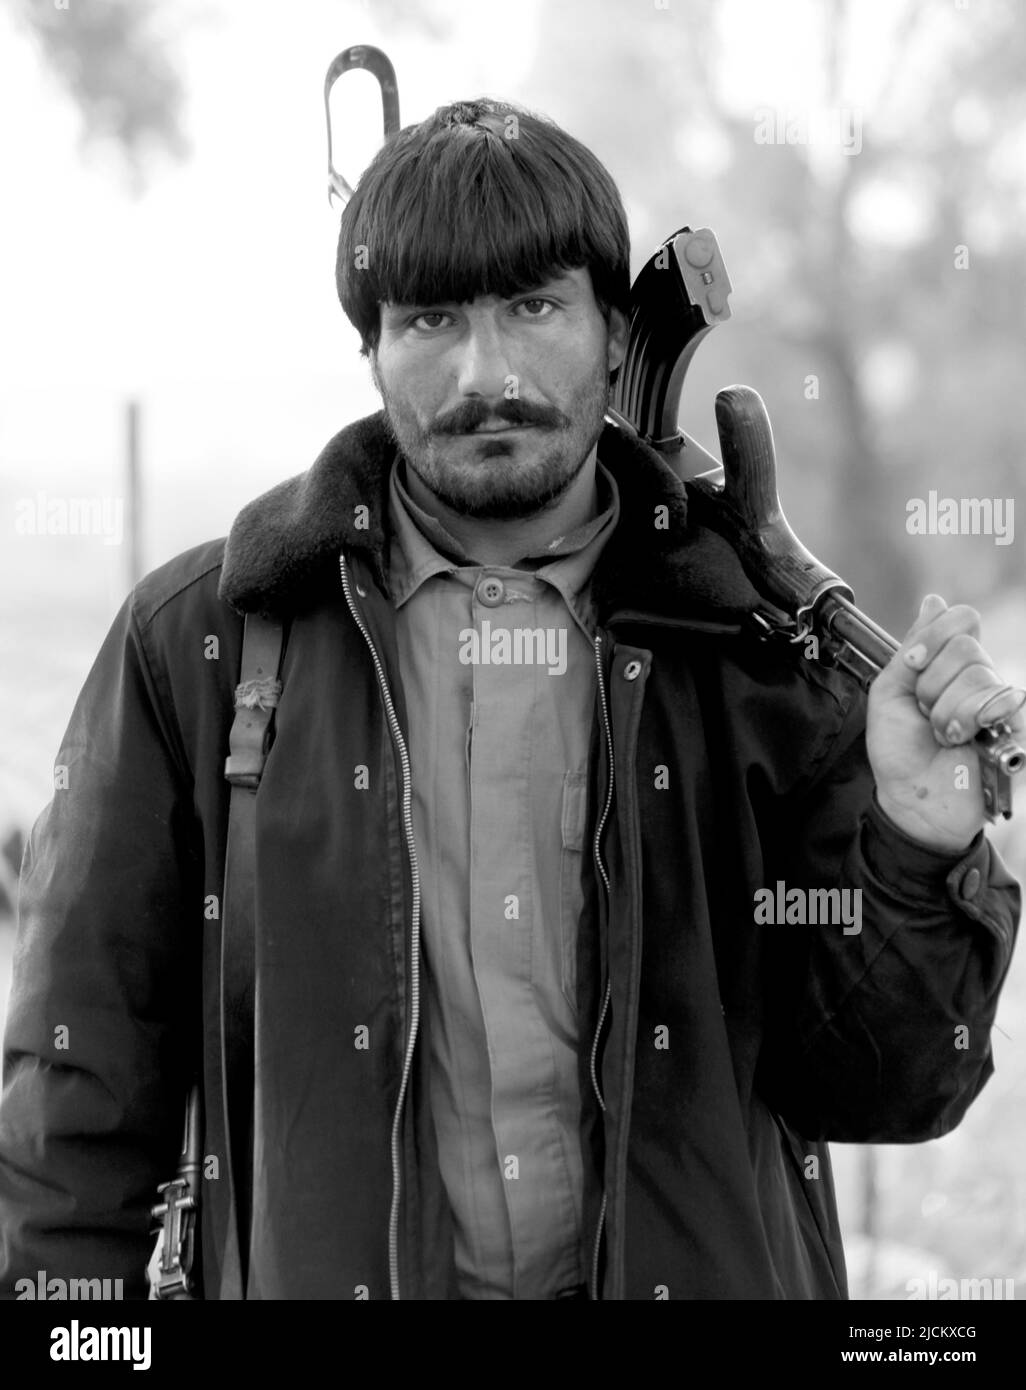 A local Afghan Uniformed Policemen (AUP) poses for a photo outside of a compound in Kajaki, Afghanistan February 15, 2012. Stock Photo